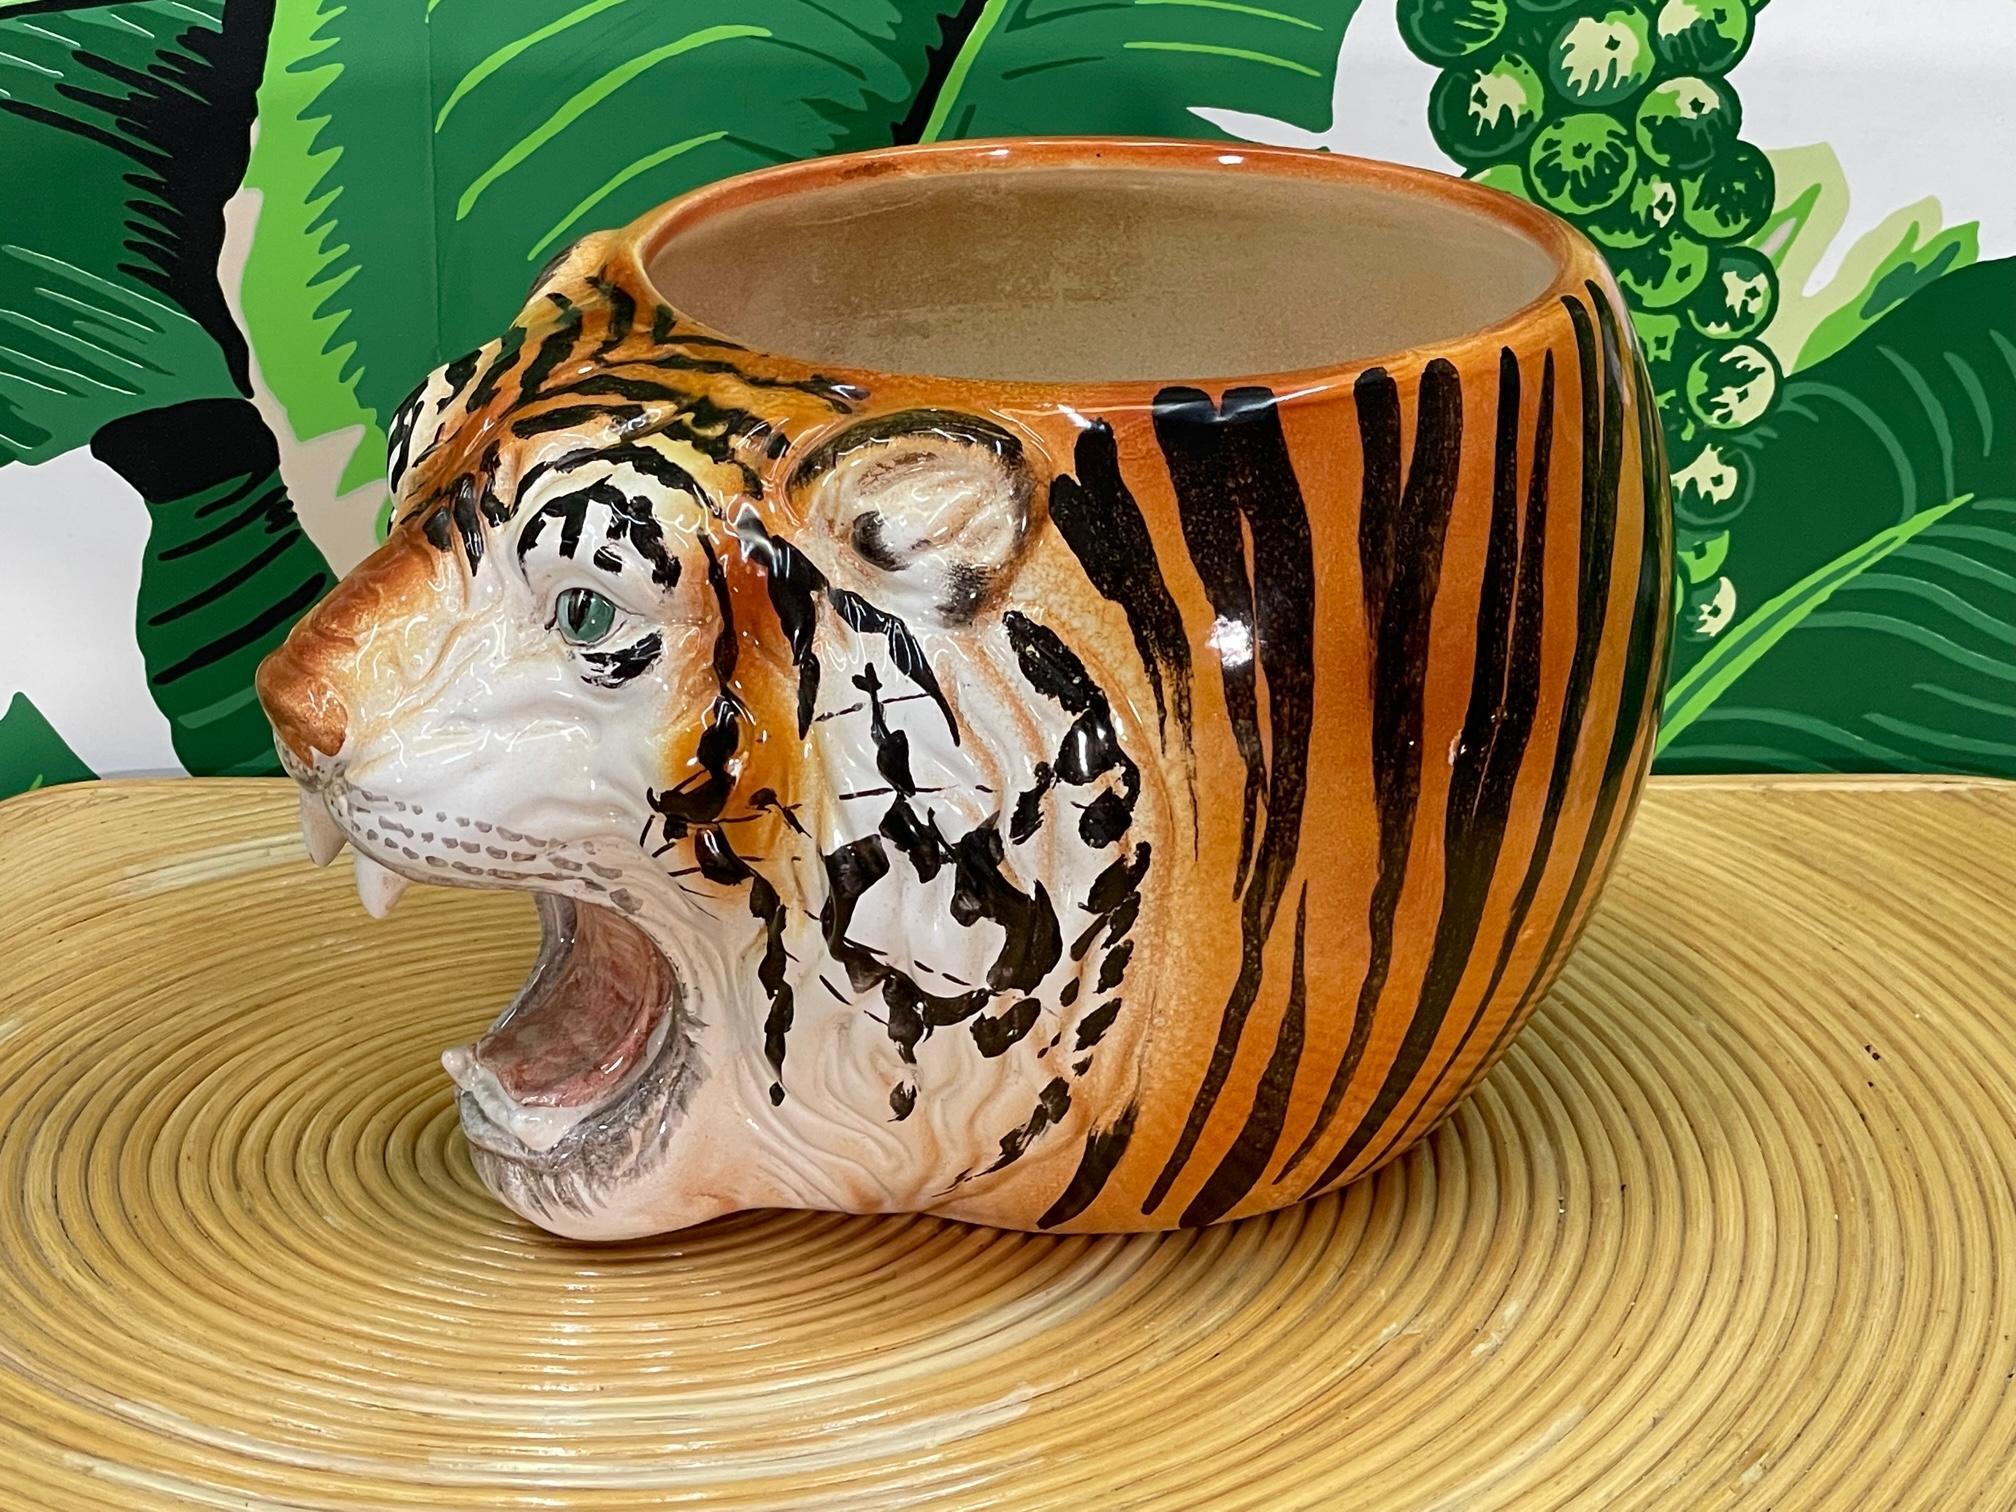 Large ceramic cachepot or bowl made in Italy features a sculptural tiger head motif and a bright, glossy glazed finish. Good condition with minor imperfections consistent with age, see photos for condition details
For a shipping quote to your exact